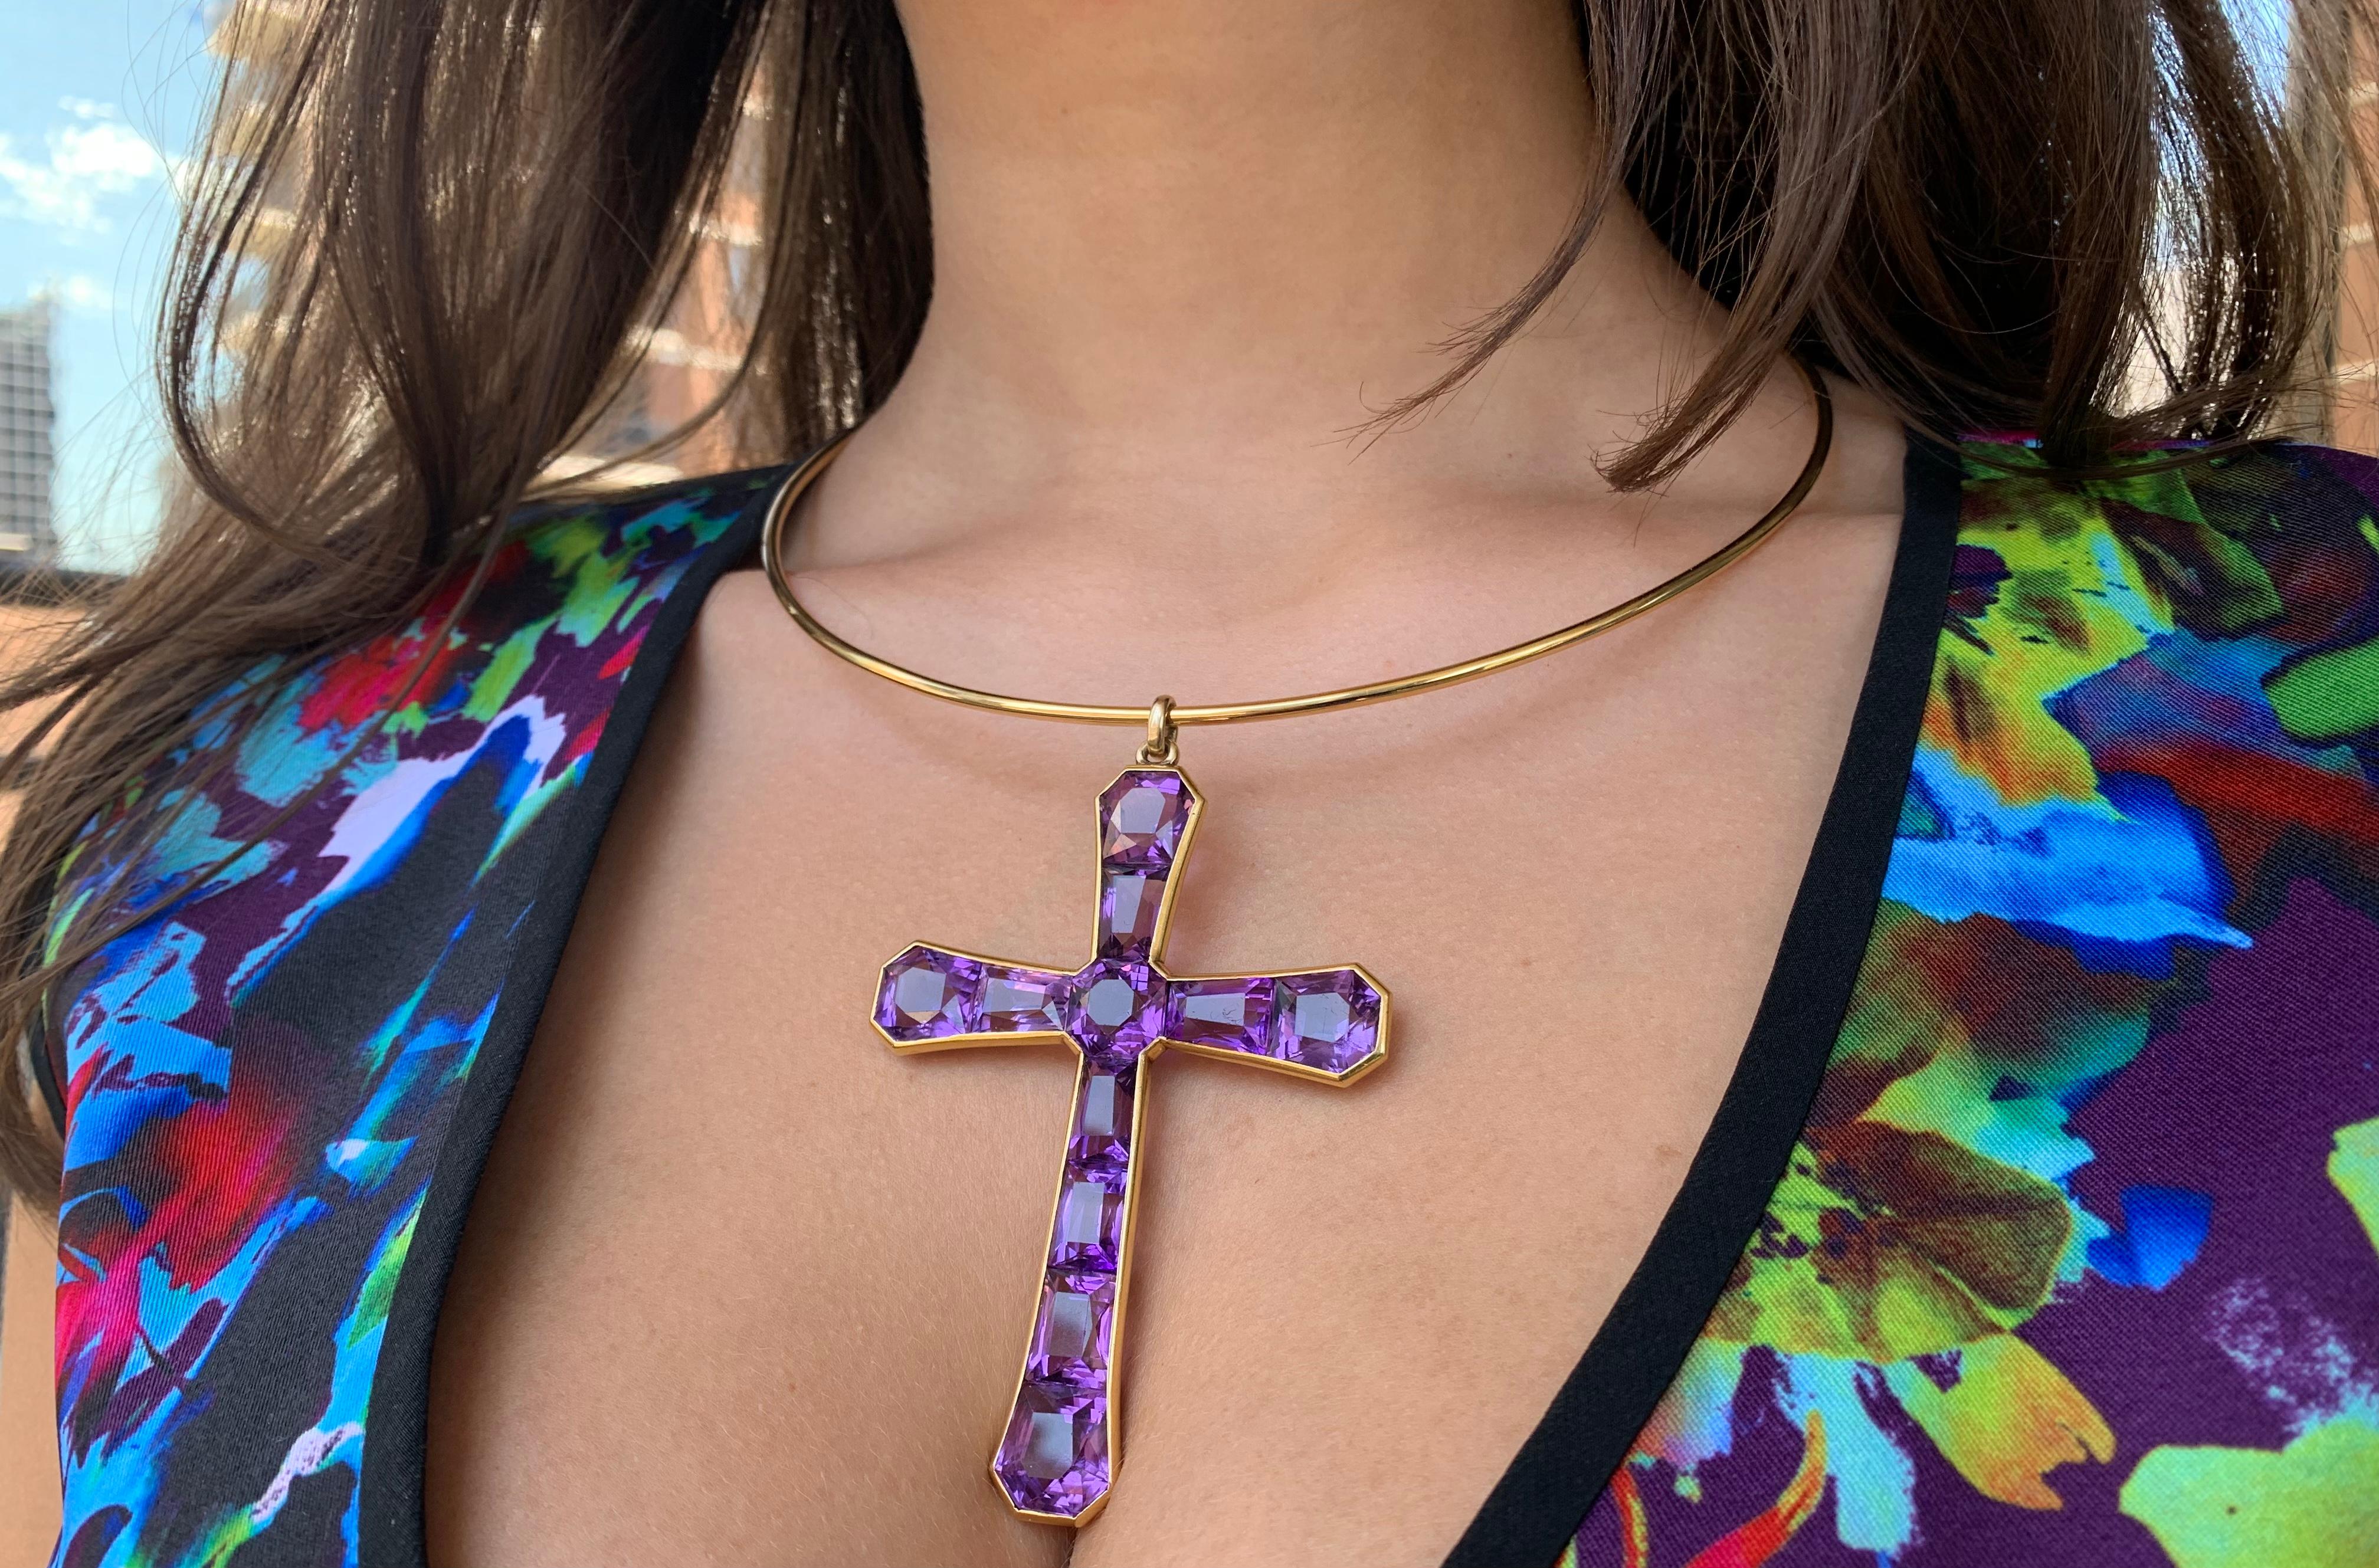 Elegant, large Georgian 18K gold invisibly set amethyst cross, featuring a central octagonal faceted amethyst surrounded by ten well matched faceted slightly flaring amethysts to form a beautifully shaped crucifix framed by an 18K yellow gold